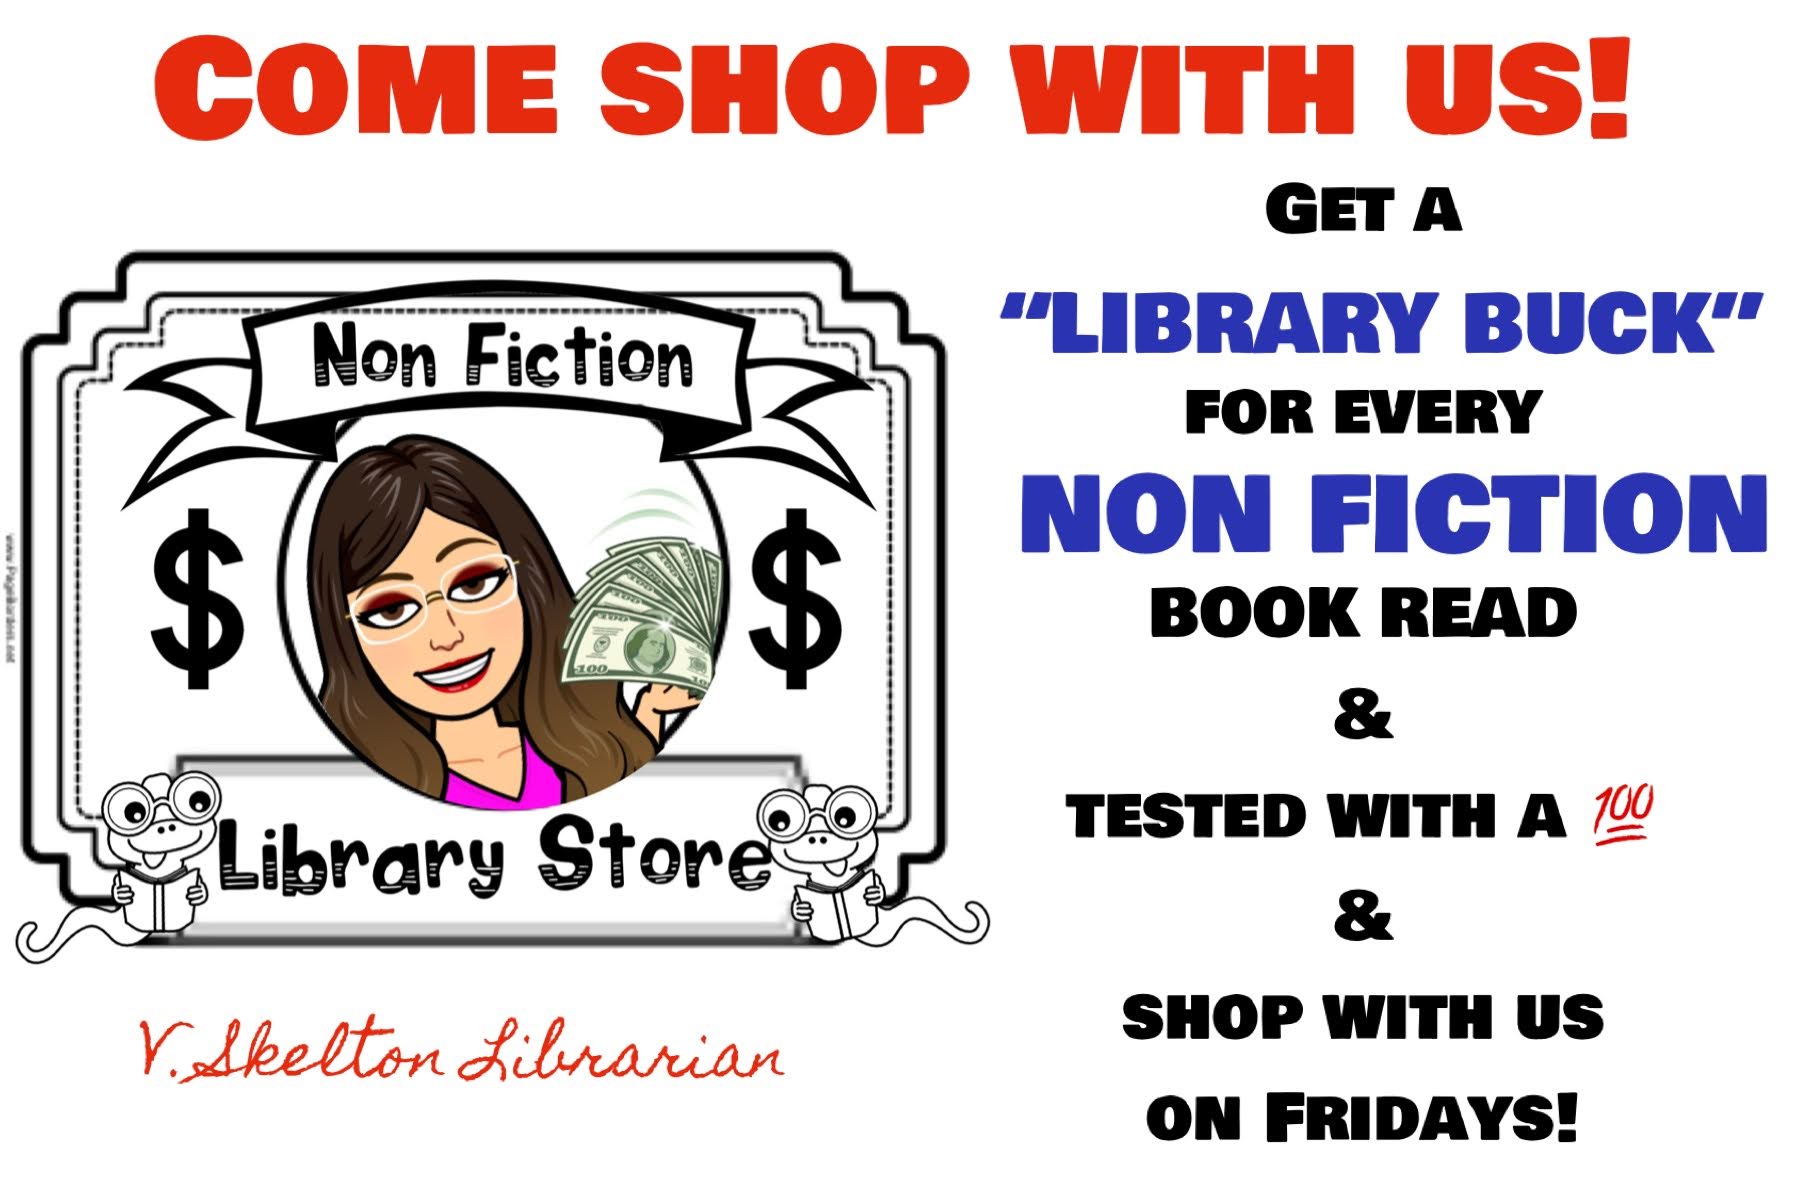 Get a tiCKet for every non fiction book read and testEd with A 100% and shop on fridays at our library store!  